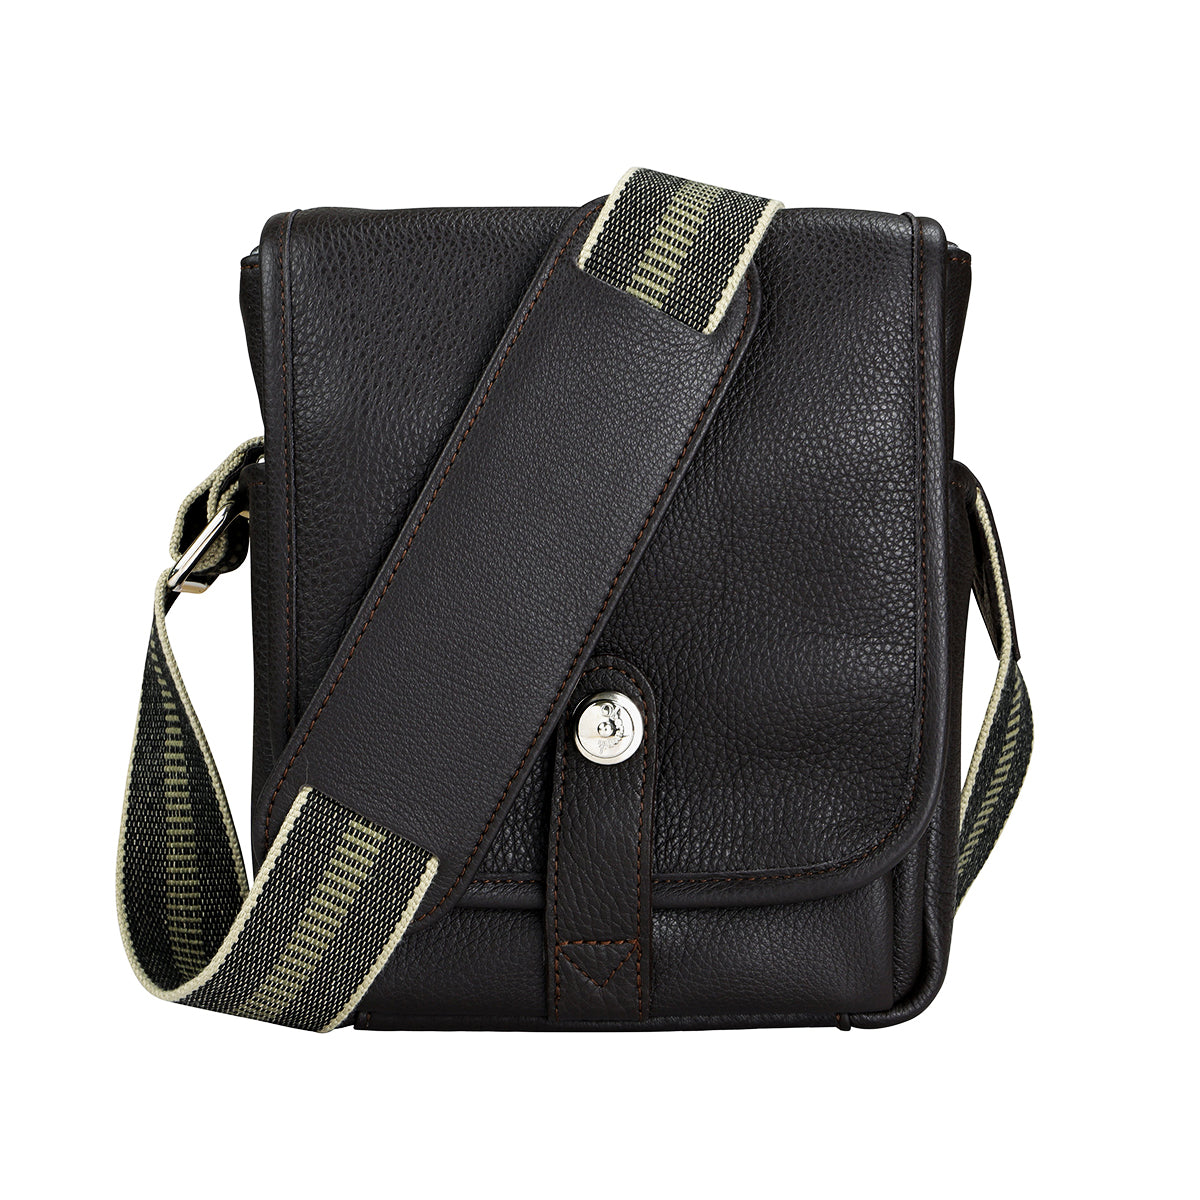 Tumbled-leather camera case with shoulder strap